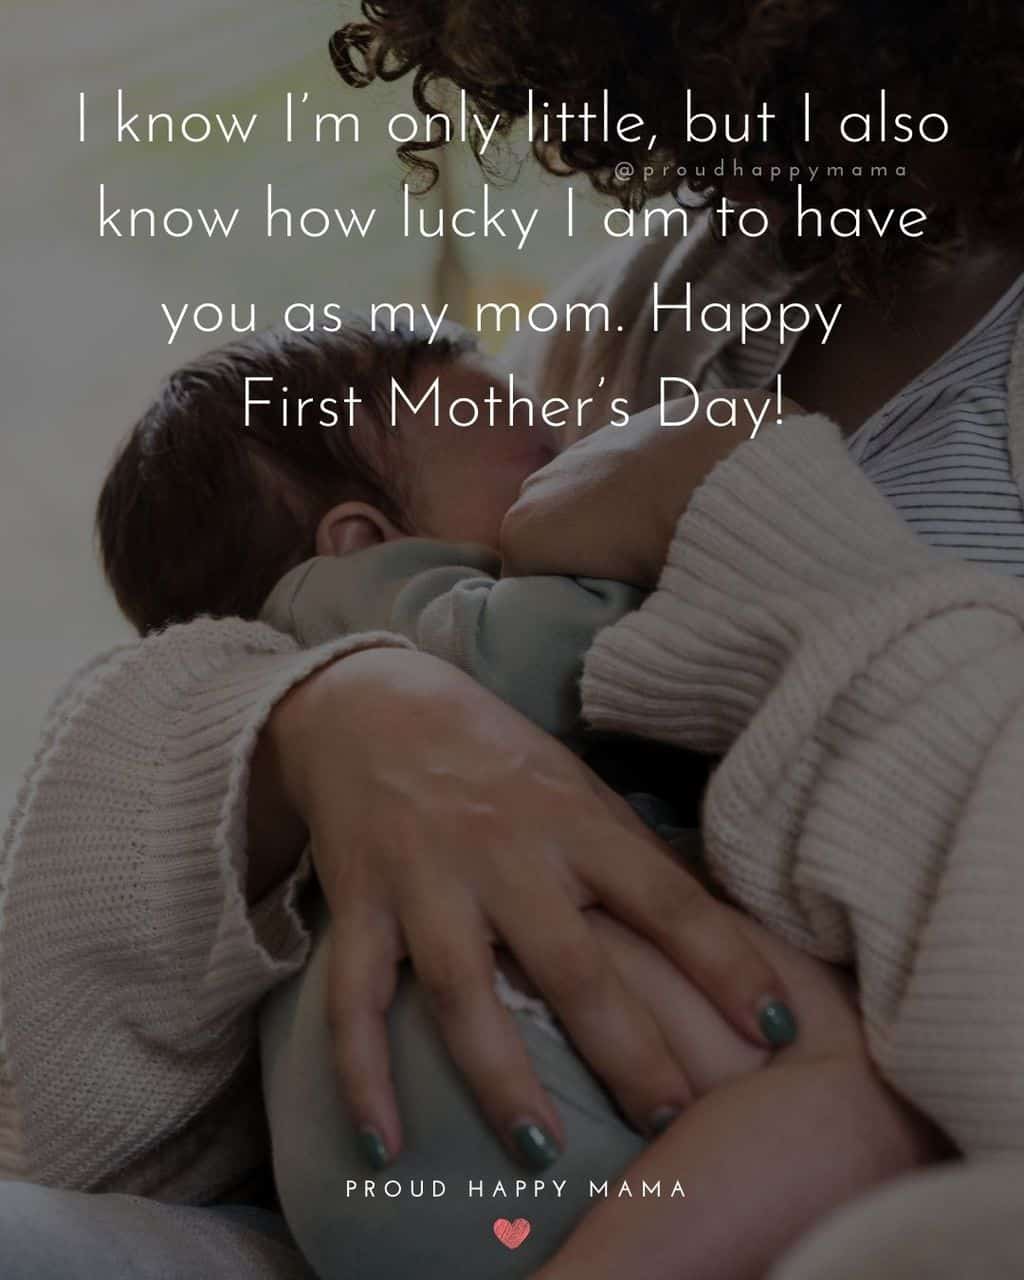 First Mothers Day Quotes - I know I’m only little, but I also know how lucky I am to have you as my mom. Happy First Mother’s Day’